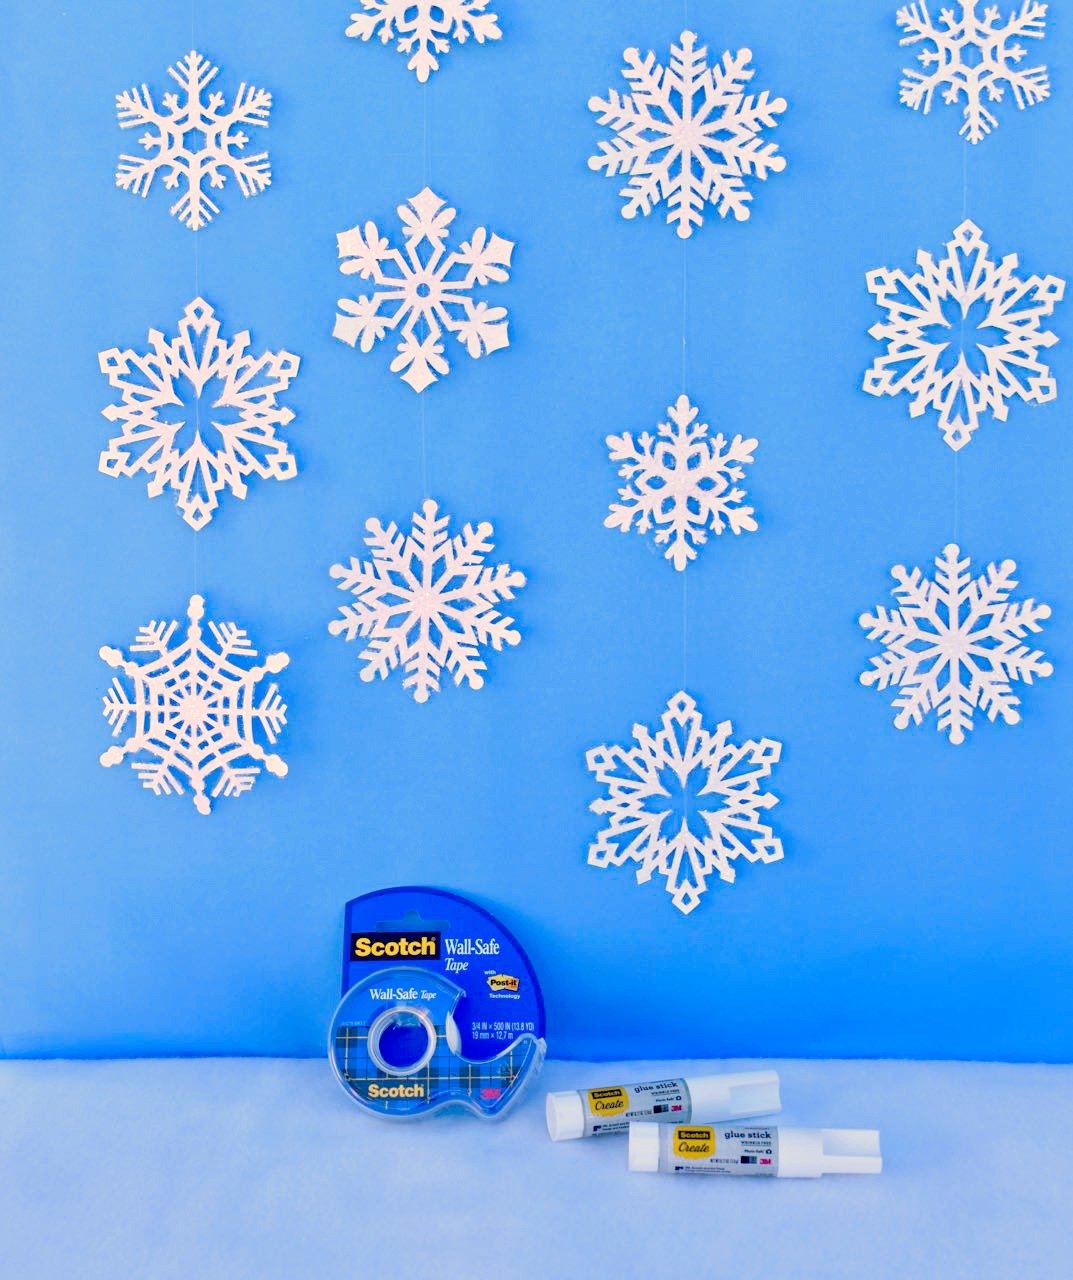 Snowflake Hanging Decorations to Turn Your Home Into a Winter Wonderland -  Make Life Lovely